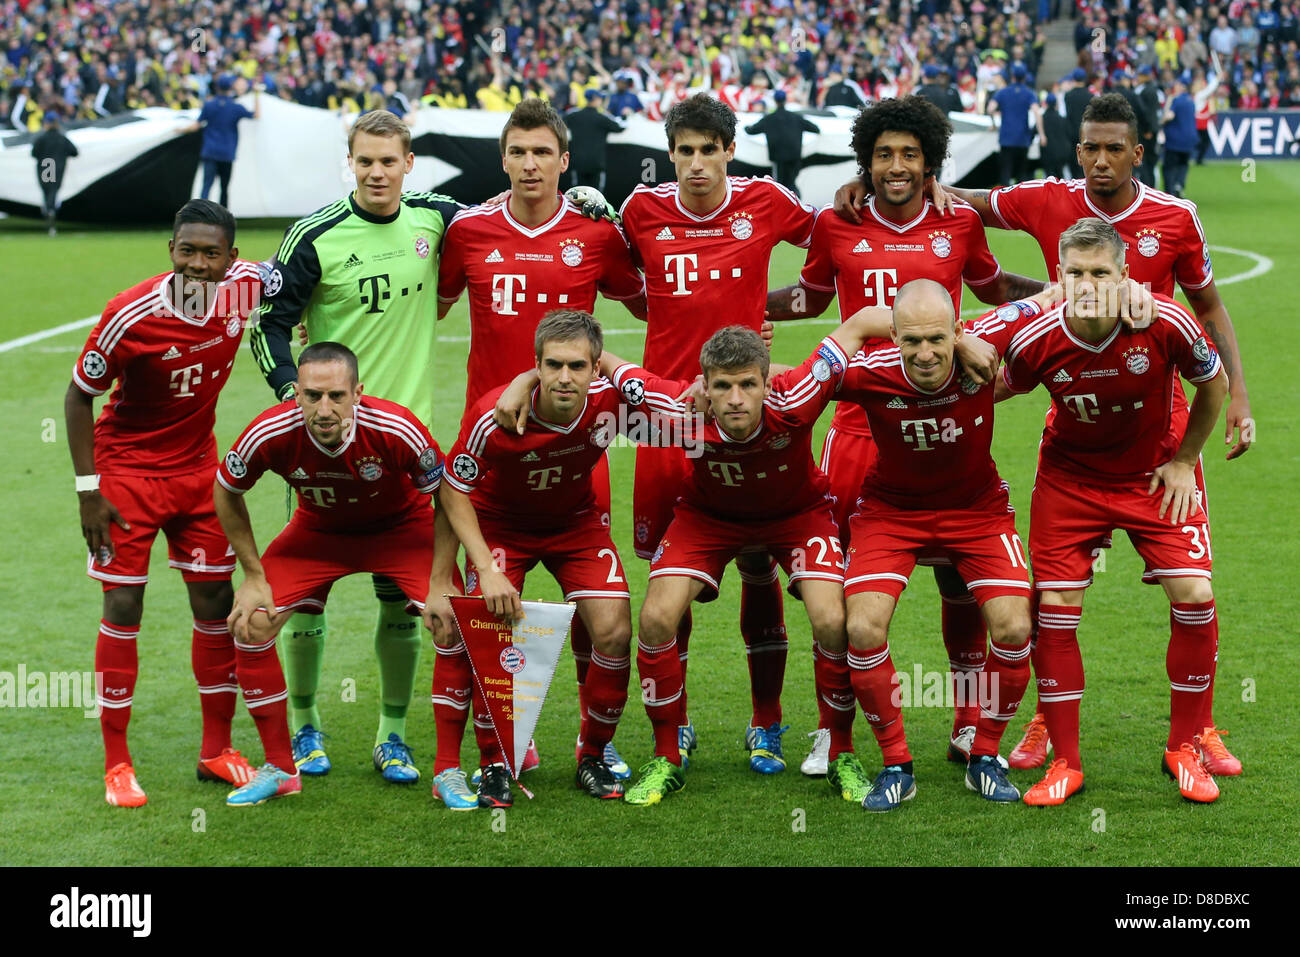 London, UK. 25th May, 2013. The team of Bayern Munich pictured before the  UEFA Champions League final between Borussia Dortmund and Bayern Munich at  Wembley Stadium in London, Britain, 25 May 2013.